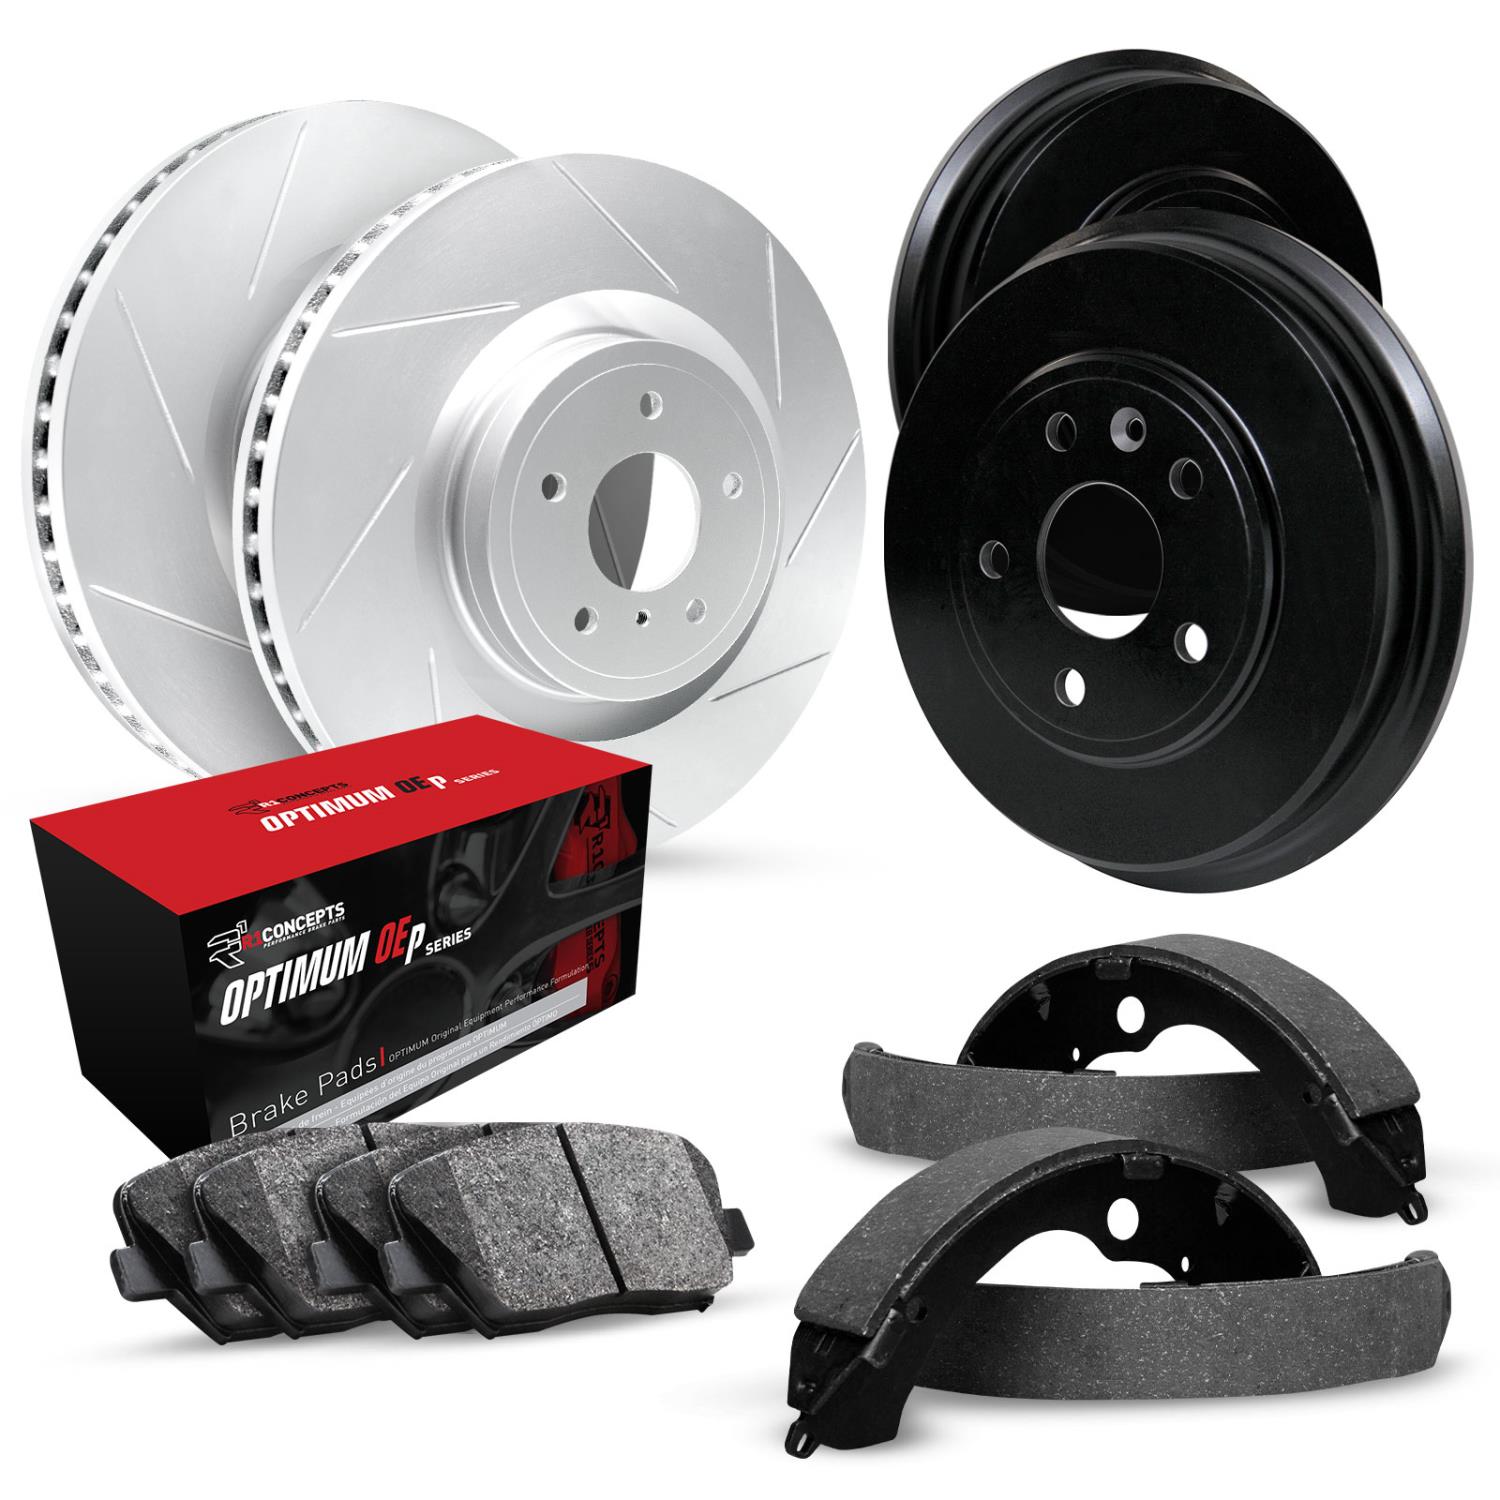 GEO-Carbon Slotted Brake Rotor & Drum Set w/Optimum OE Pads & Shoes, 1989-2002 Infiniti/Nissan, Position: Front & Rear